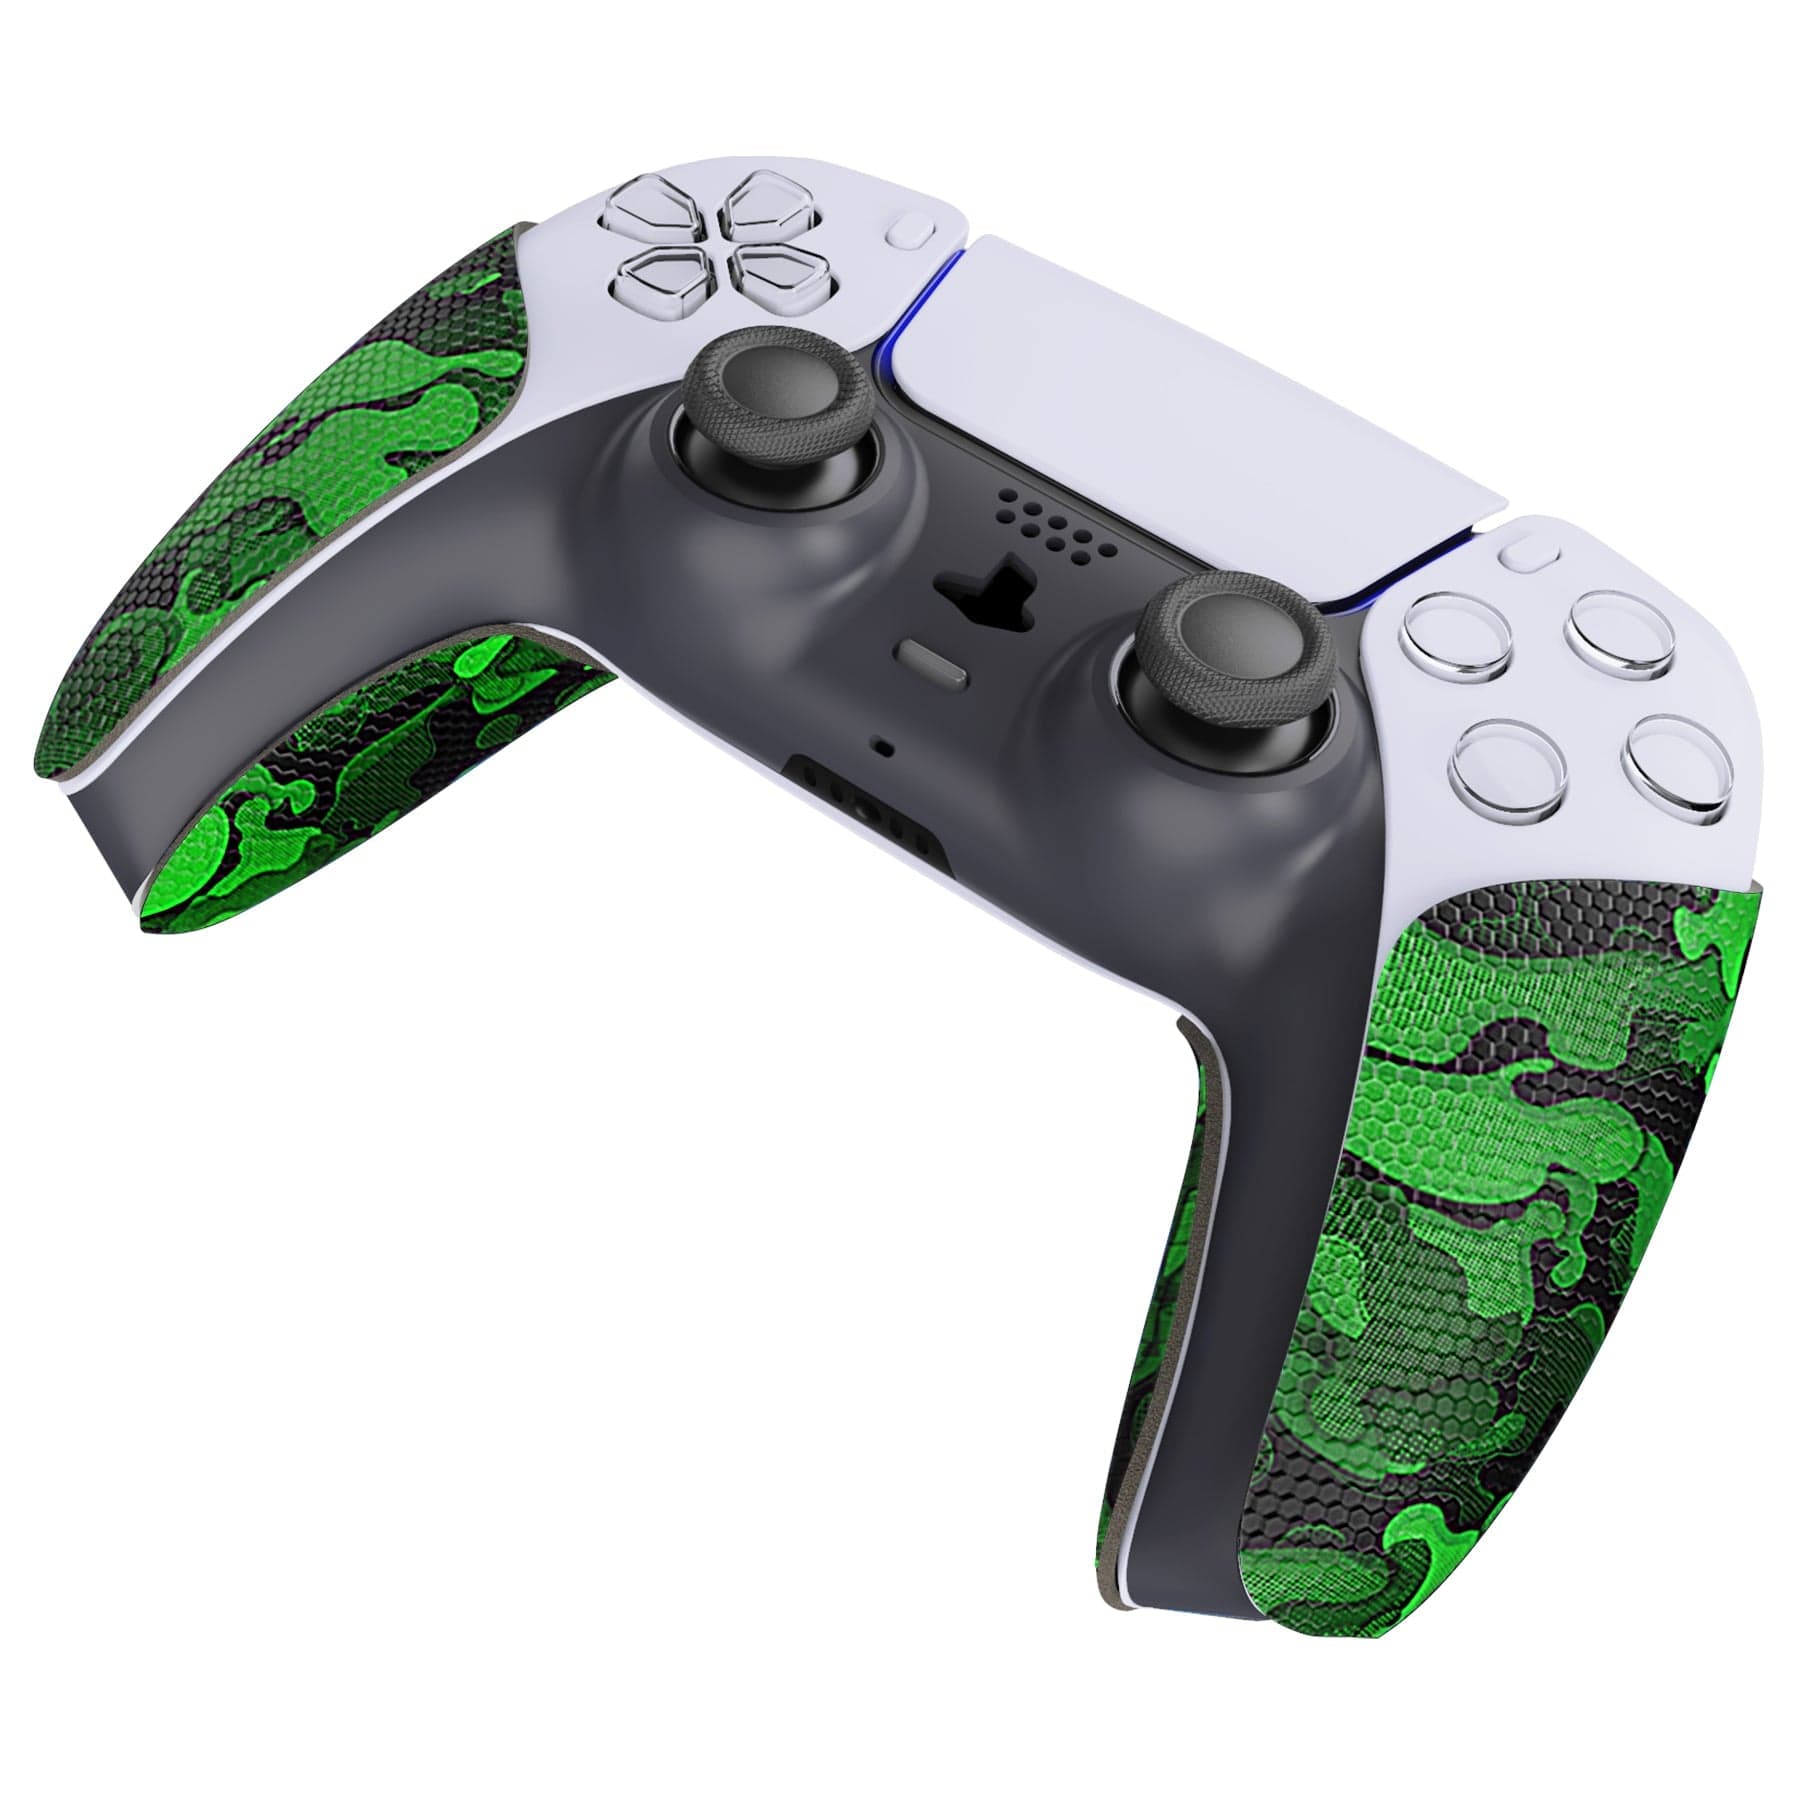 PlayVital Anti-Skid Sweat-Absorbent Controller Grip for PS5 Controller, Professional Textured Soft Rubber Pads Handle Grips for PS5 Controller - Black Green Camouflage - PFPJ064 PlayVital